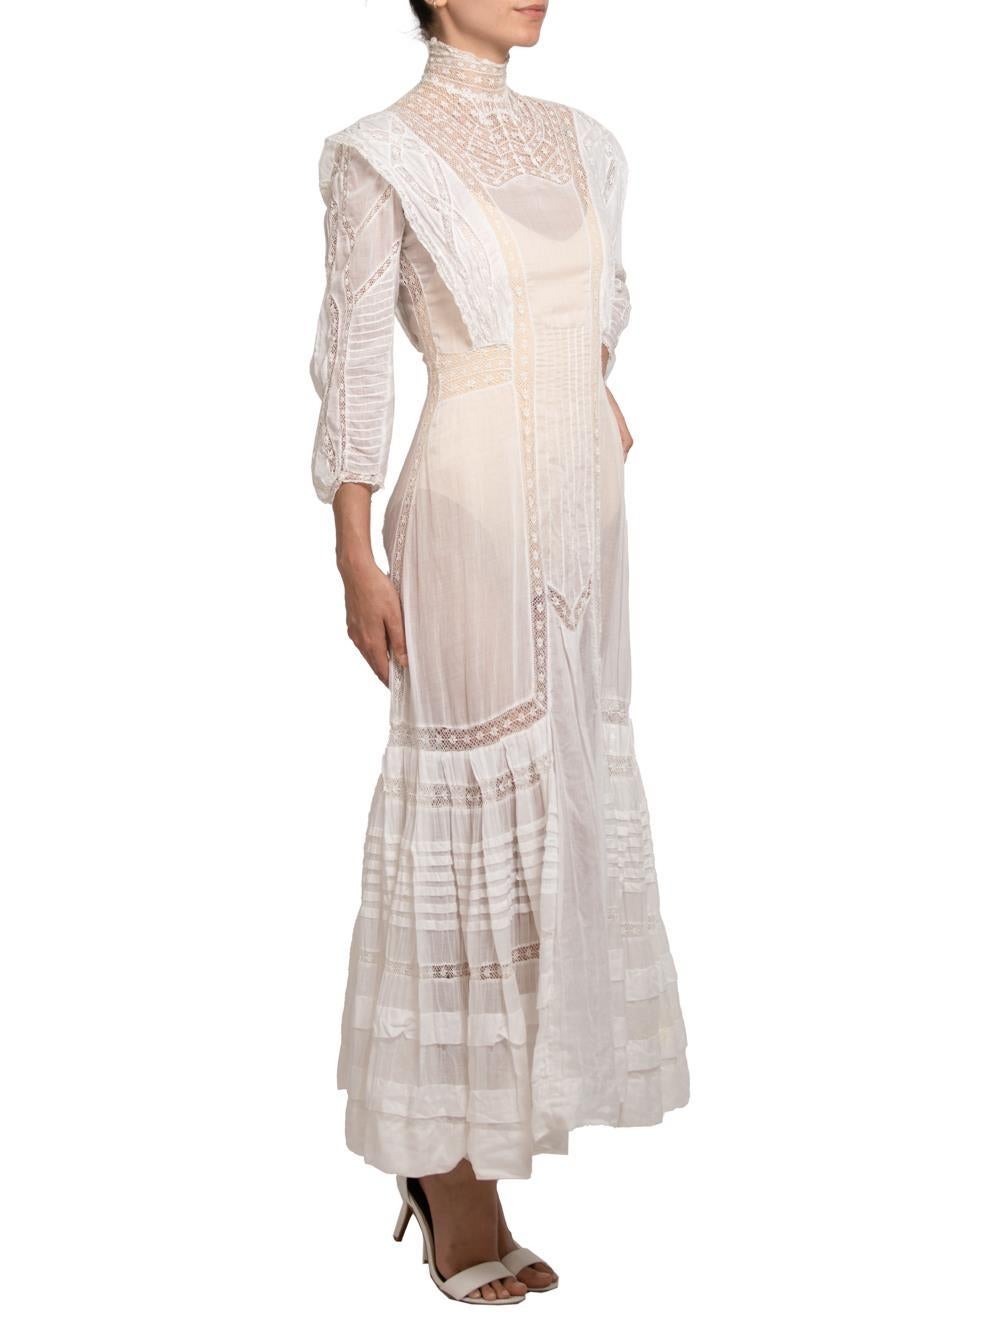 Victorian Cream Organic Cotton Voile & Lace Long Sleeved Dress For Sale 4